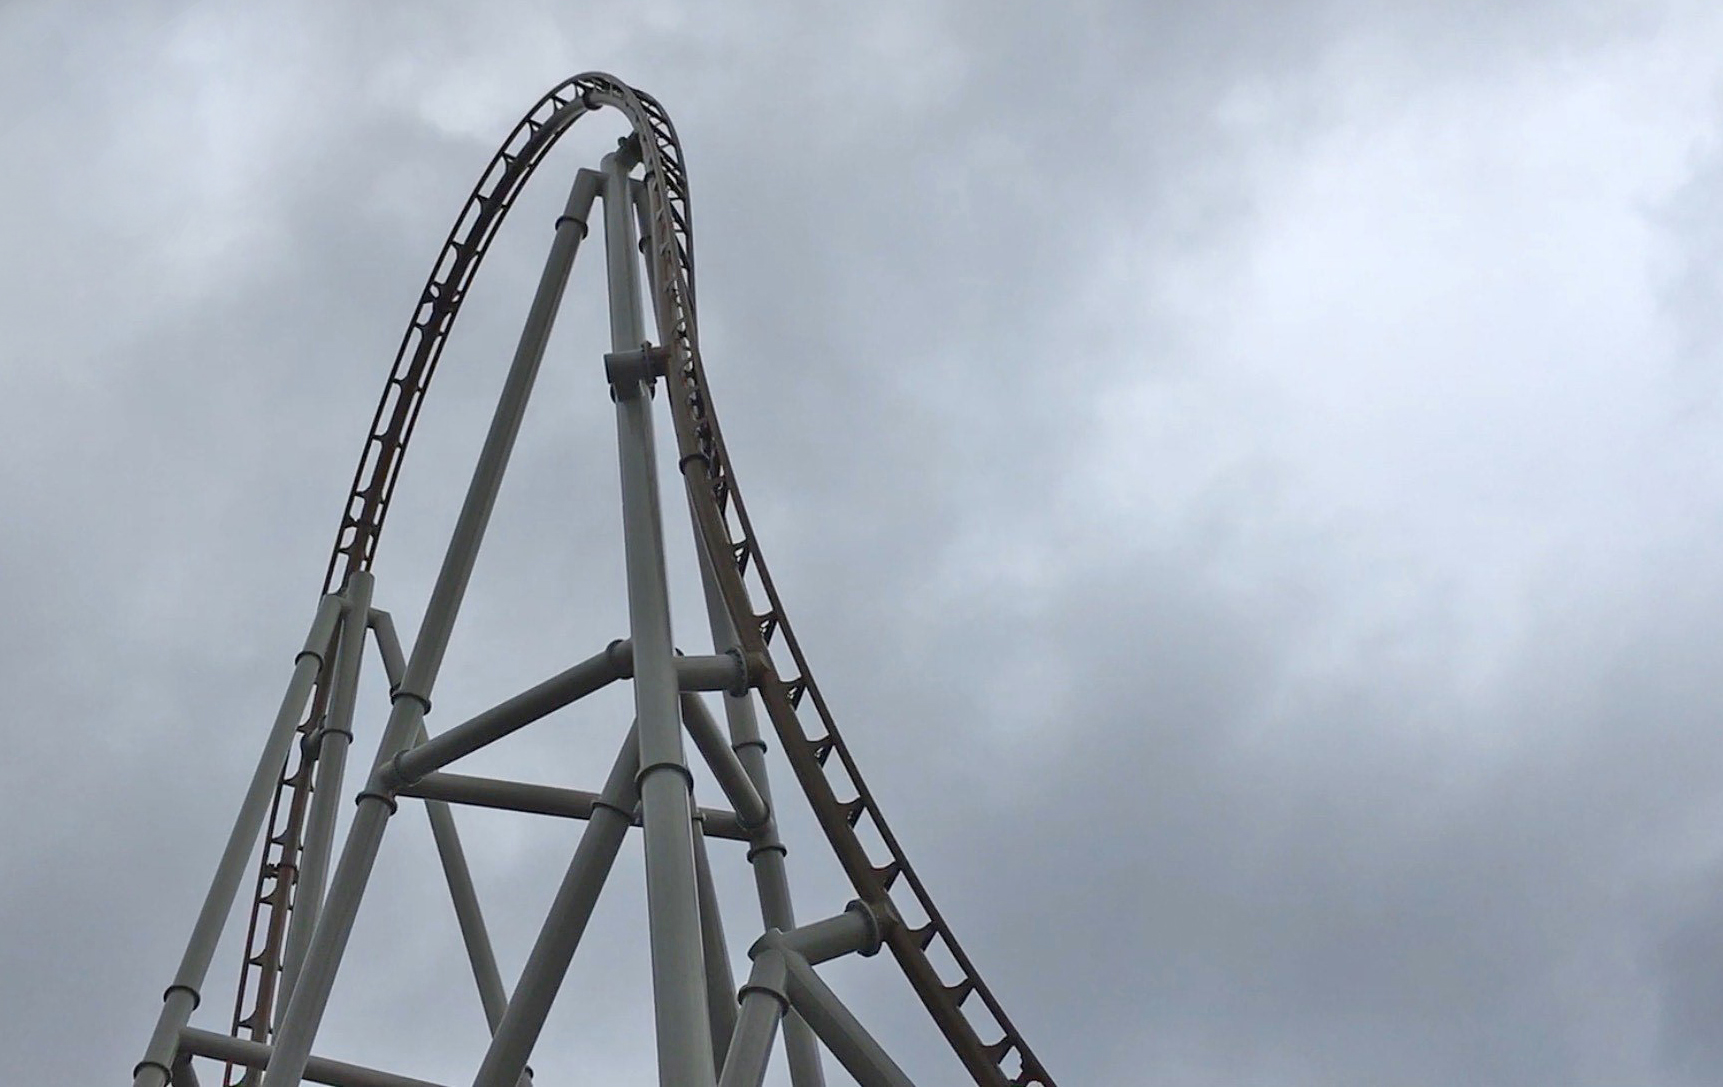 Pantheon, BGW] this ride is fantastic, new #1 coaster. : r/rollercoasters